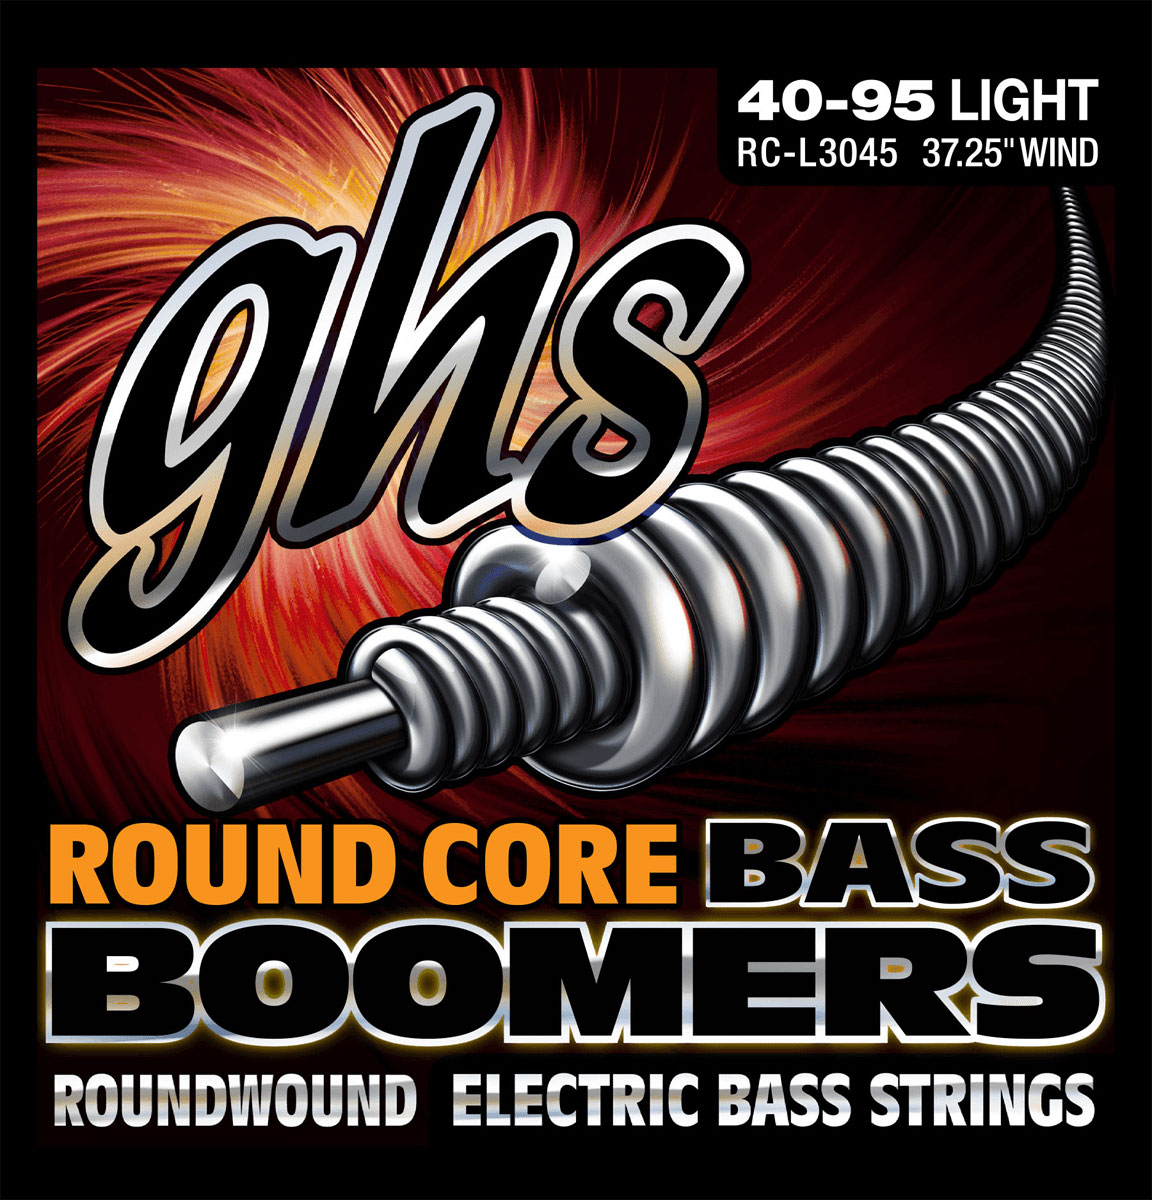 GHS RC-L3045 ROUND CORE BASS BOOMERS LIGHT 40-95